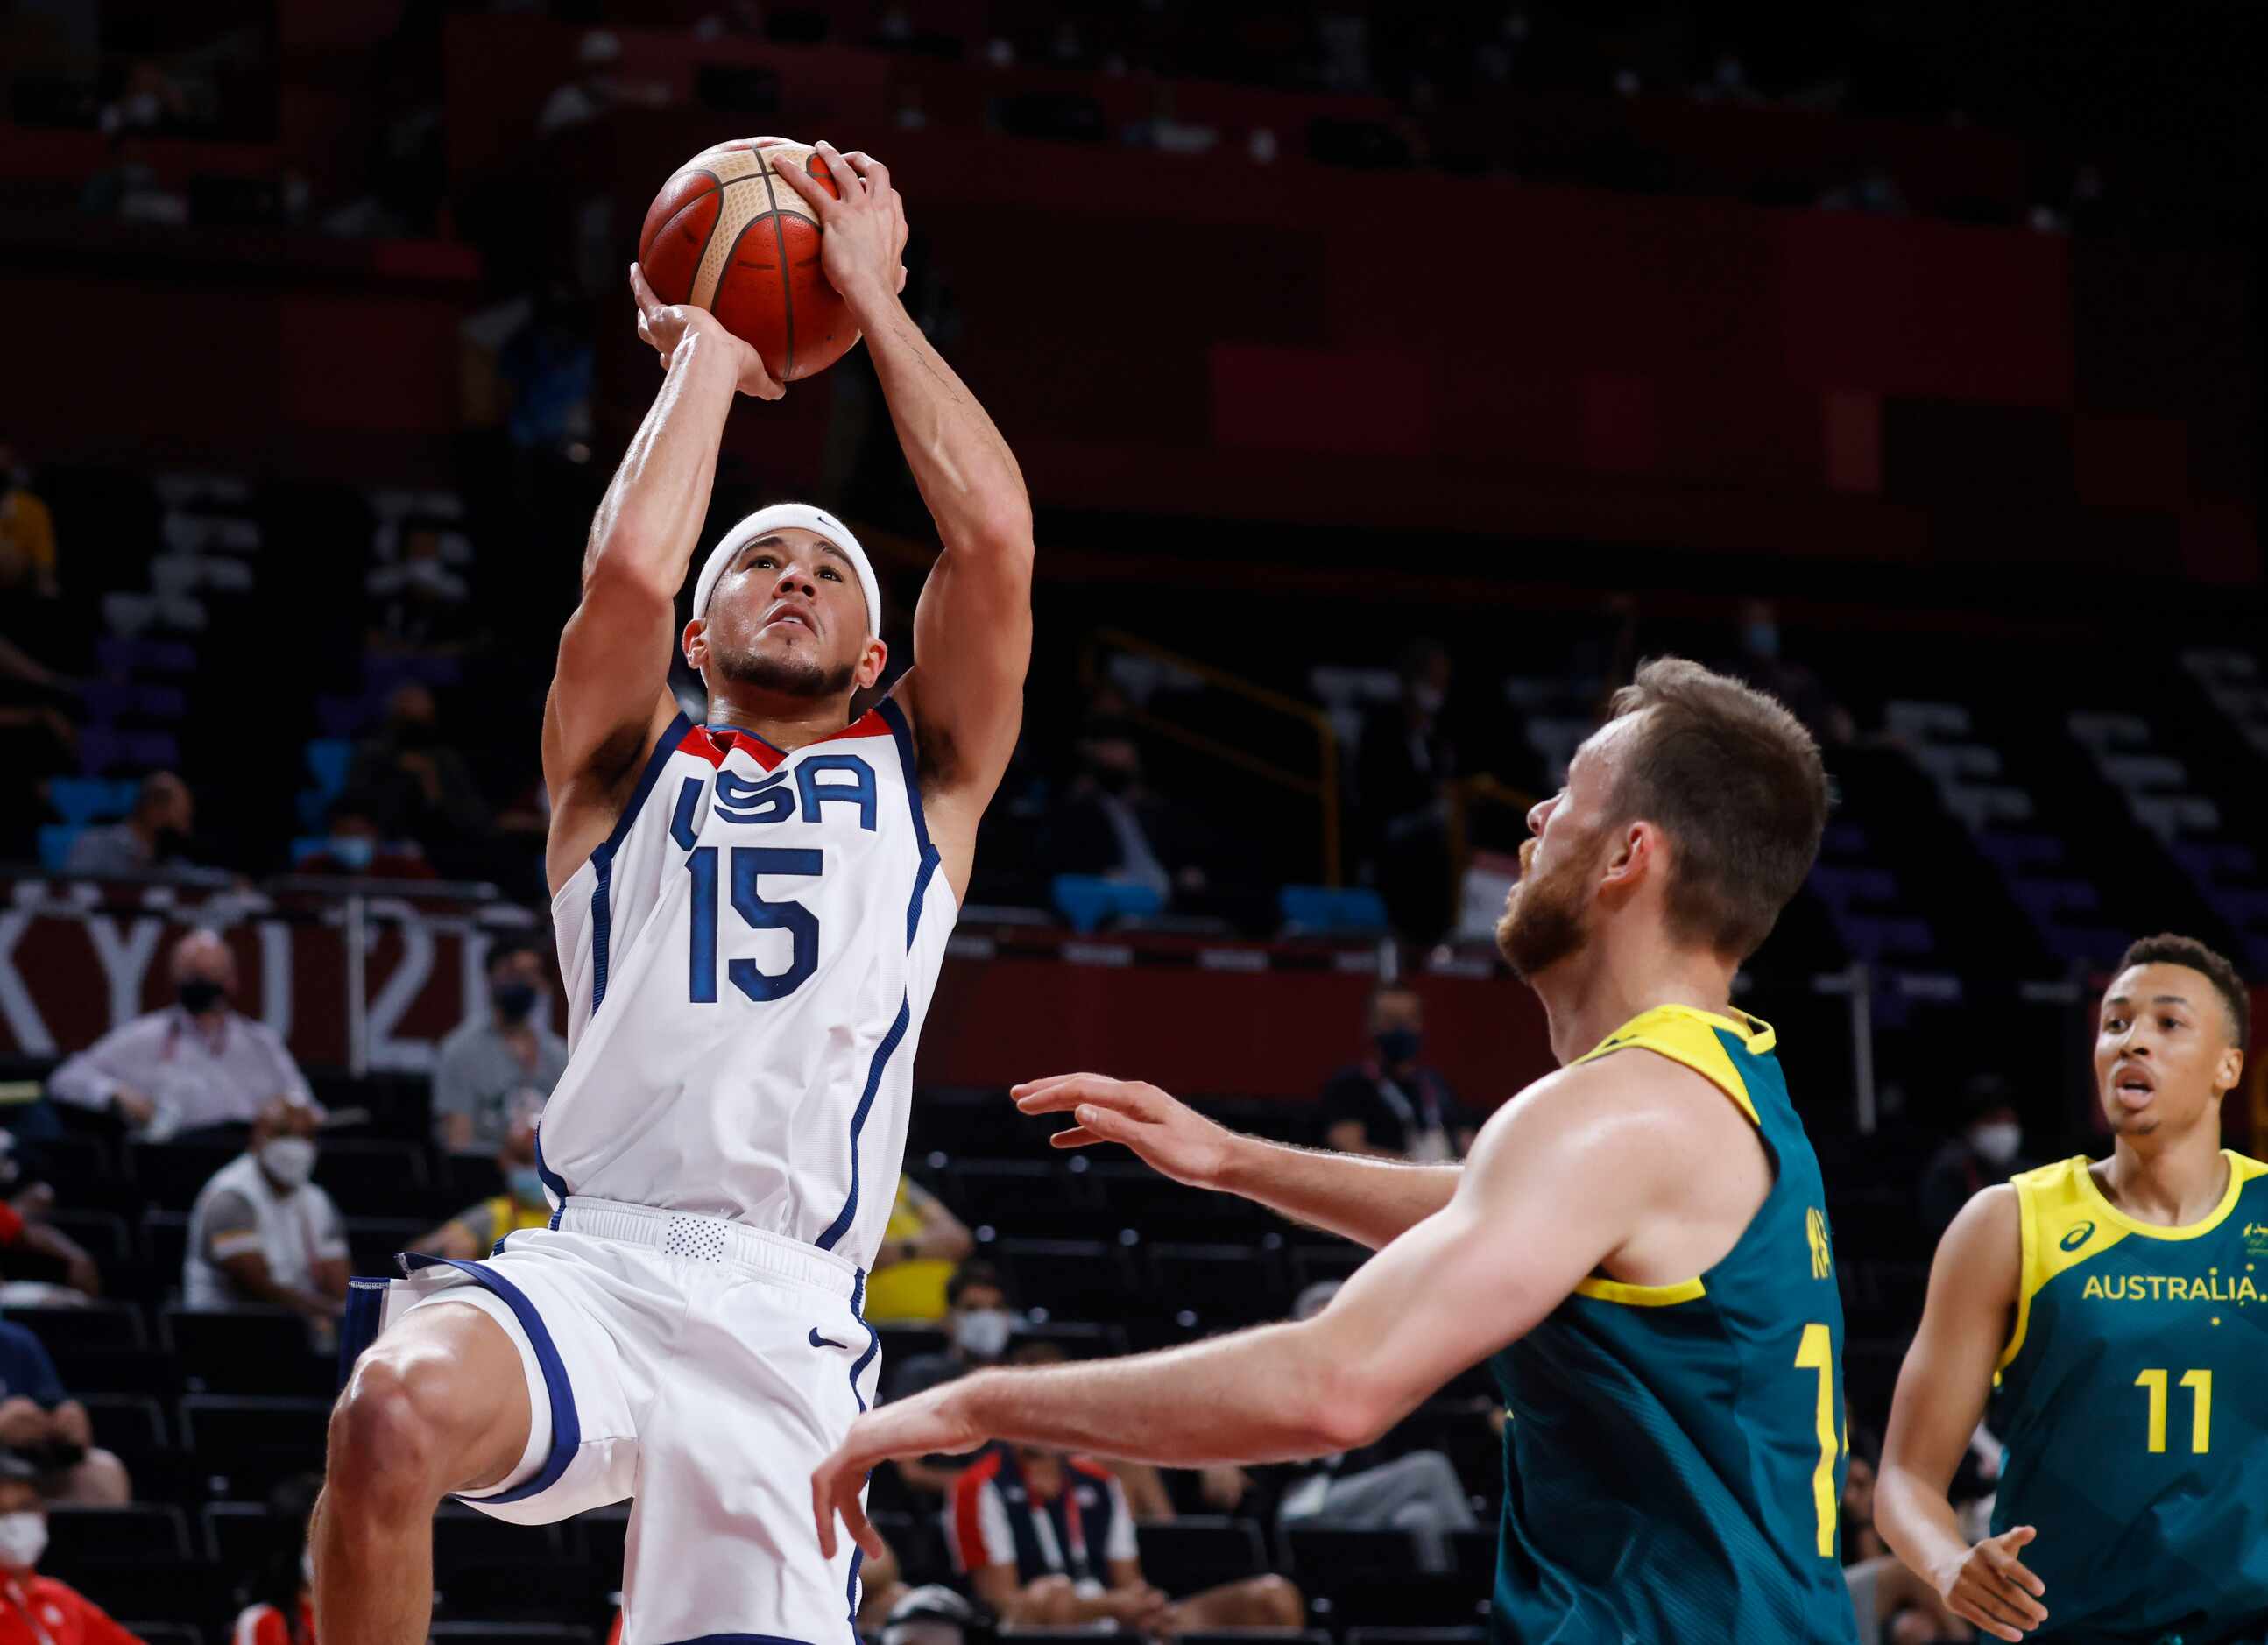 USA’s Devin Booker attempts a shot in front of 
Australia’s Nic Kay (15) during the first...